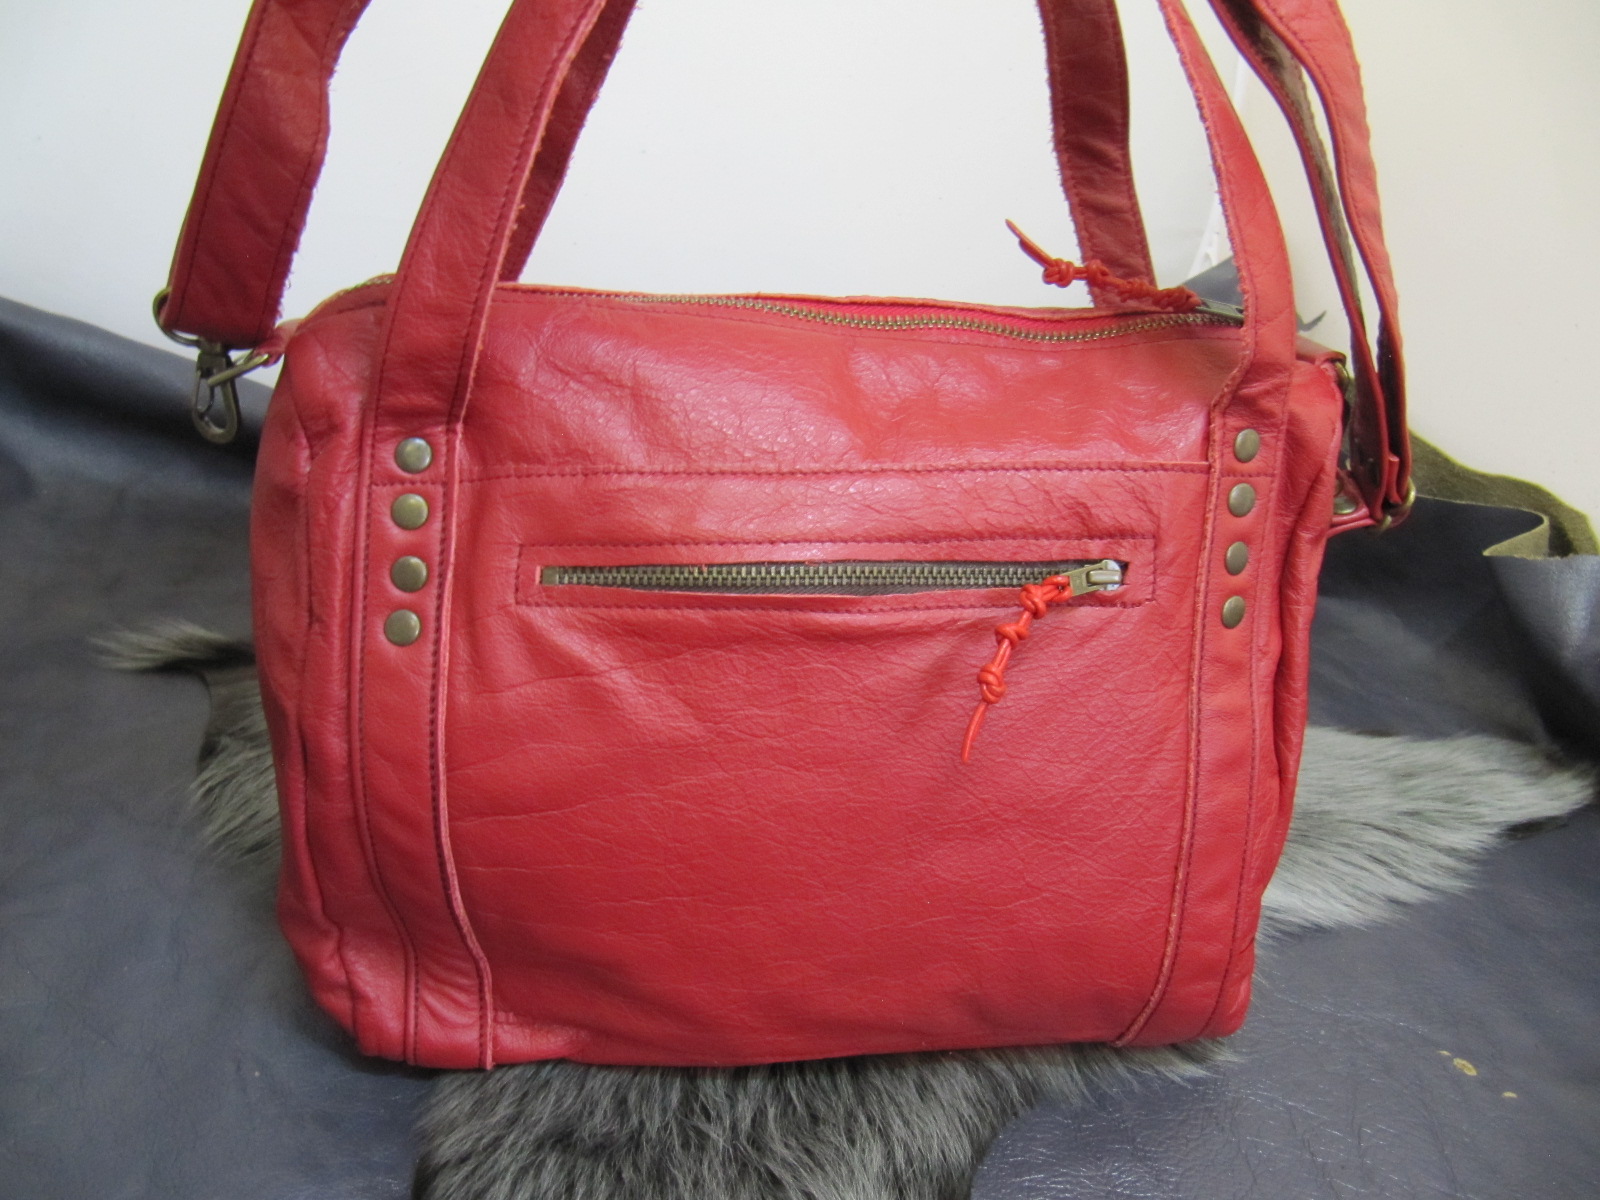 Red leather Bowling style handbag